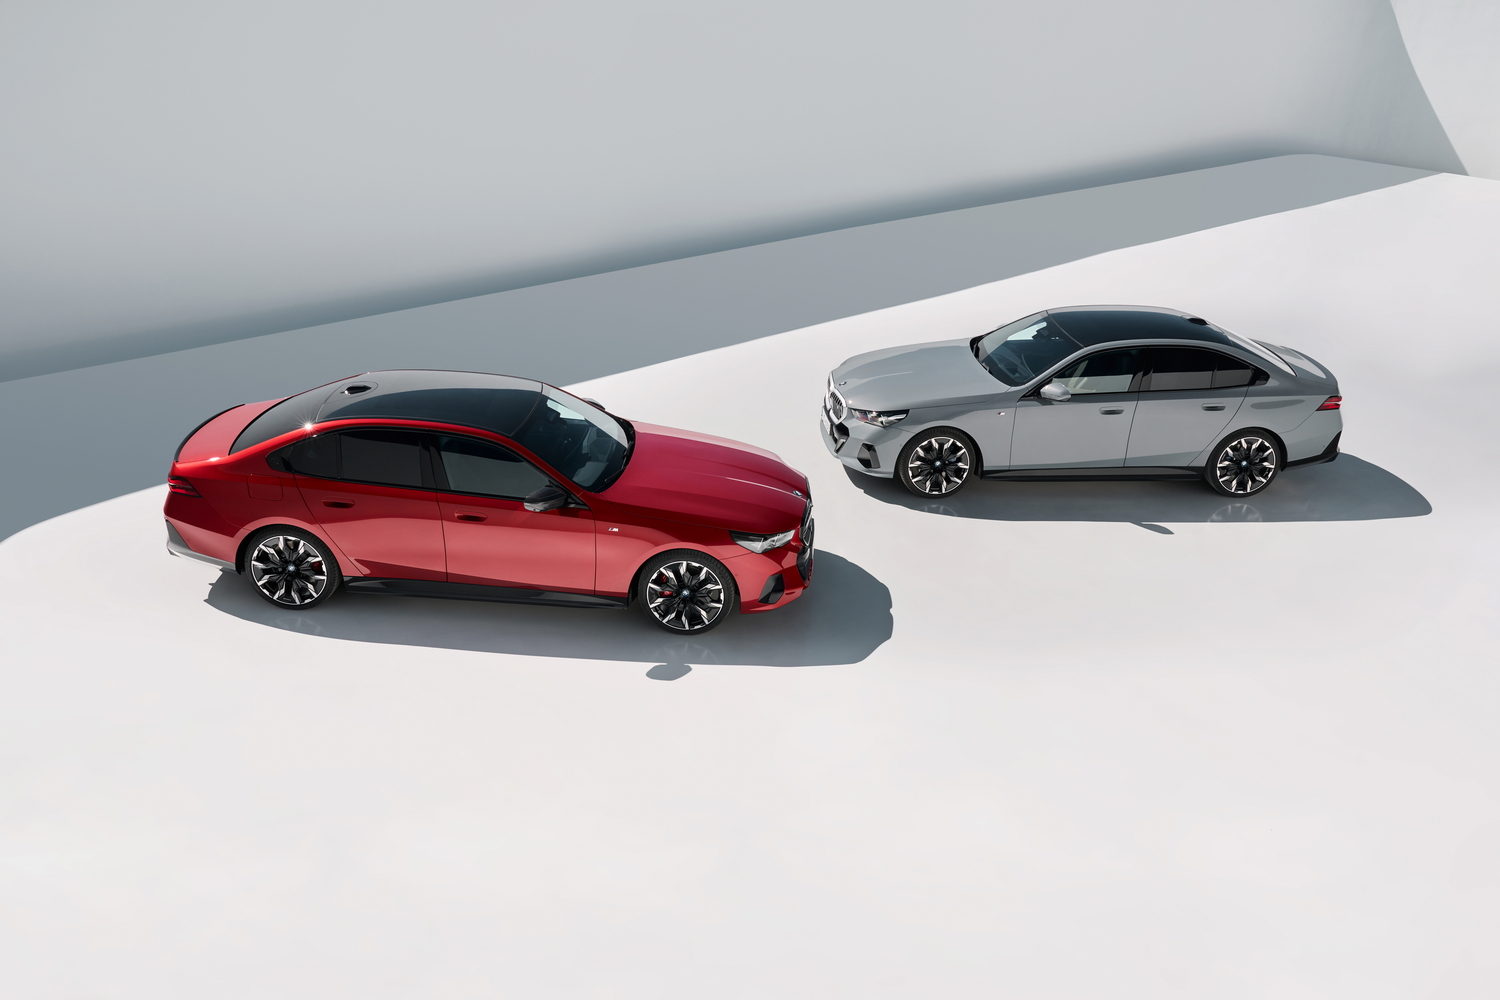 Car News | BMW i5 is new electric 5 Series | CompleteCar.ie